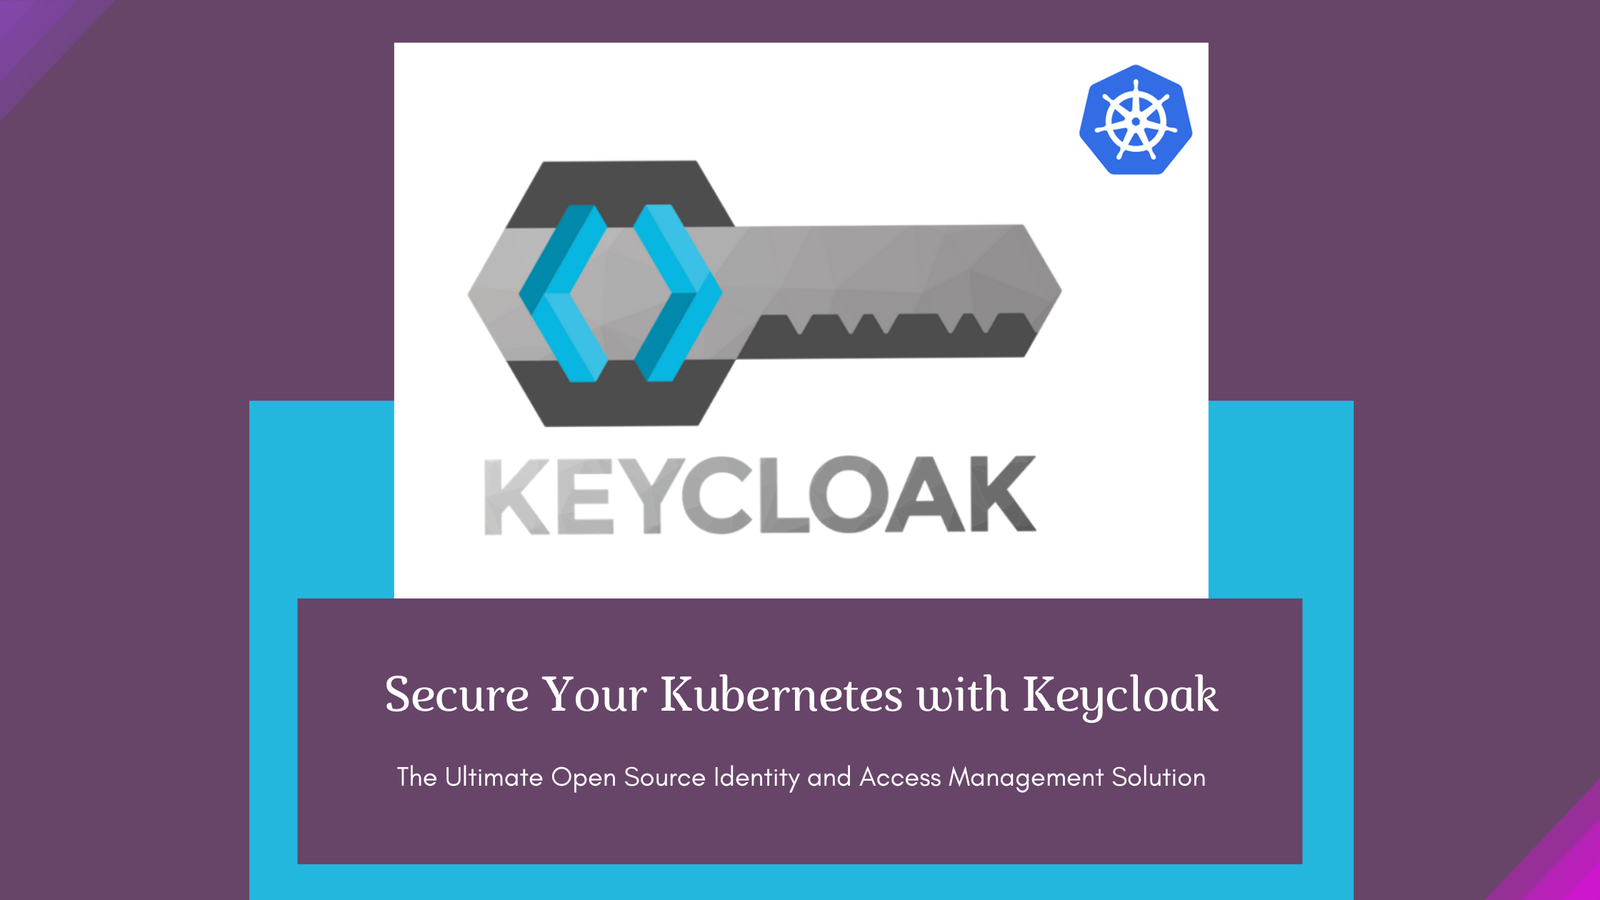 Securing Kubernetes with Keycloak